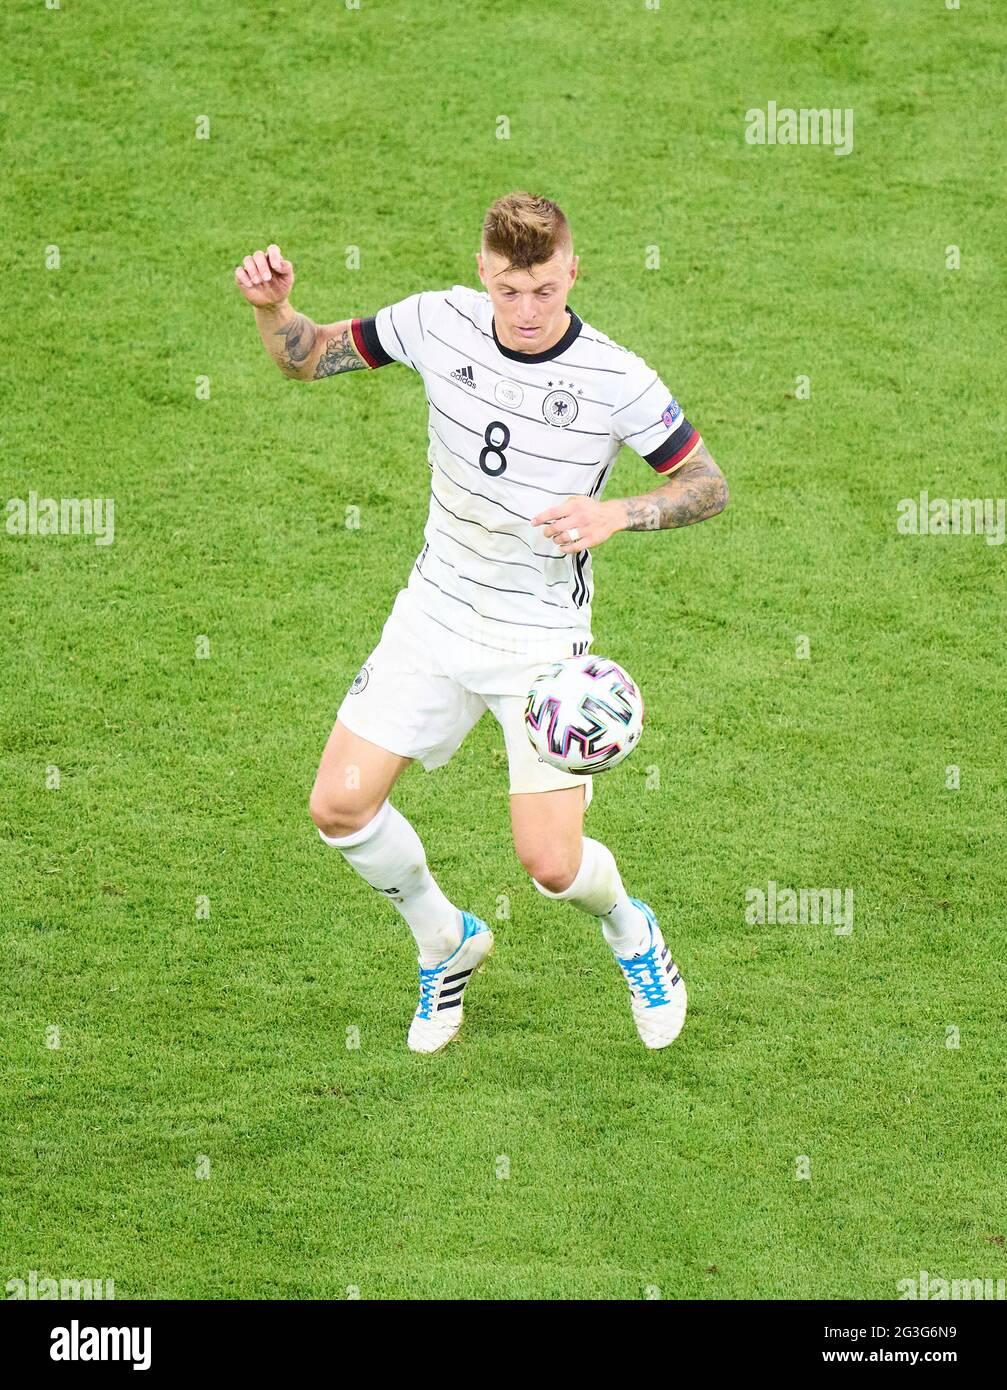 Toni Kroos, DFB 8  in the Group F match FRANCE - GERMANY  1-0 at the football UEFA European Championships 2020 in Season 2020/2021 on June 15, 2021  in Munich, Germany. © Peter Schatz / Alamy Live News Stock Photo